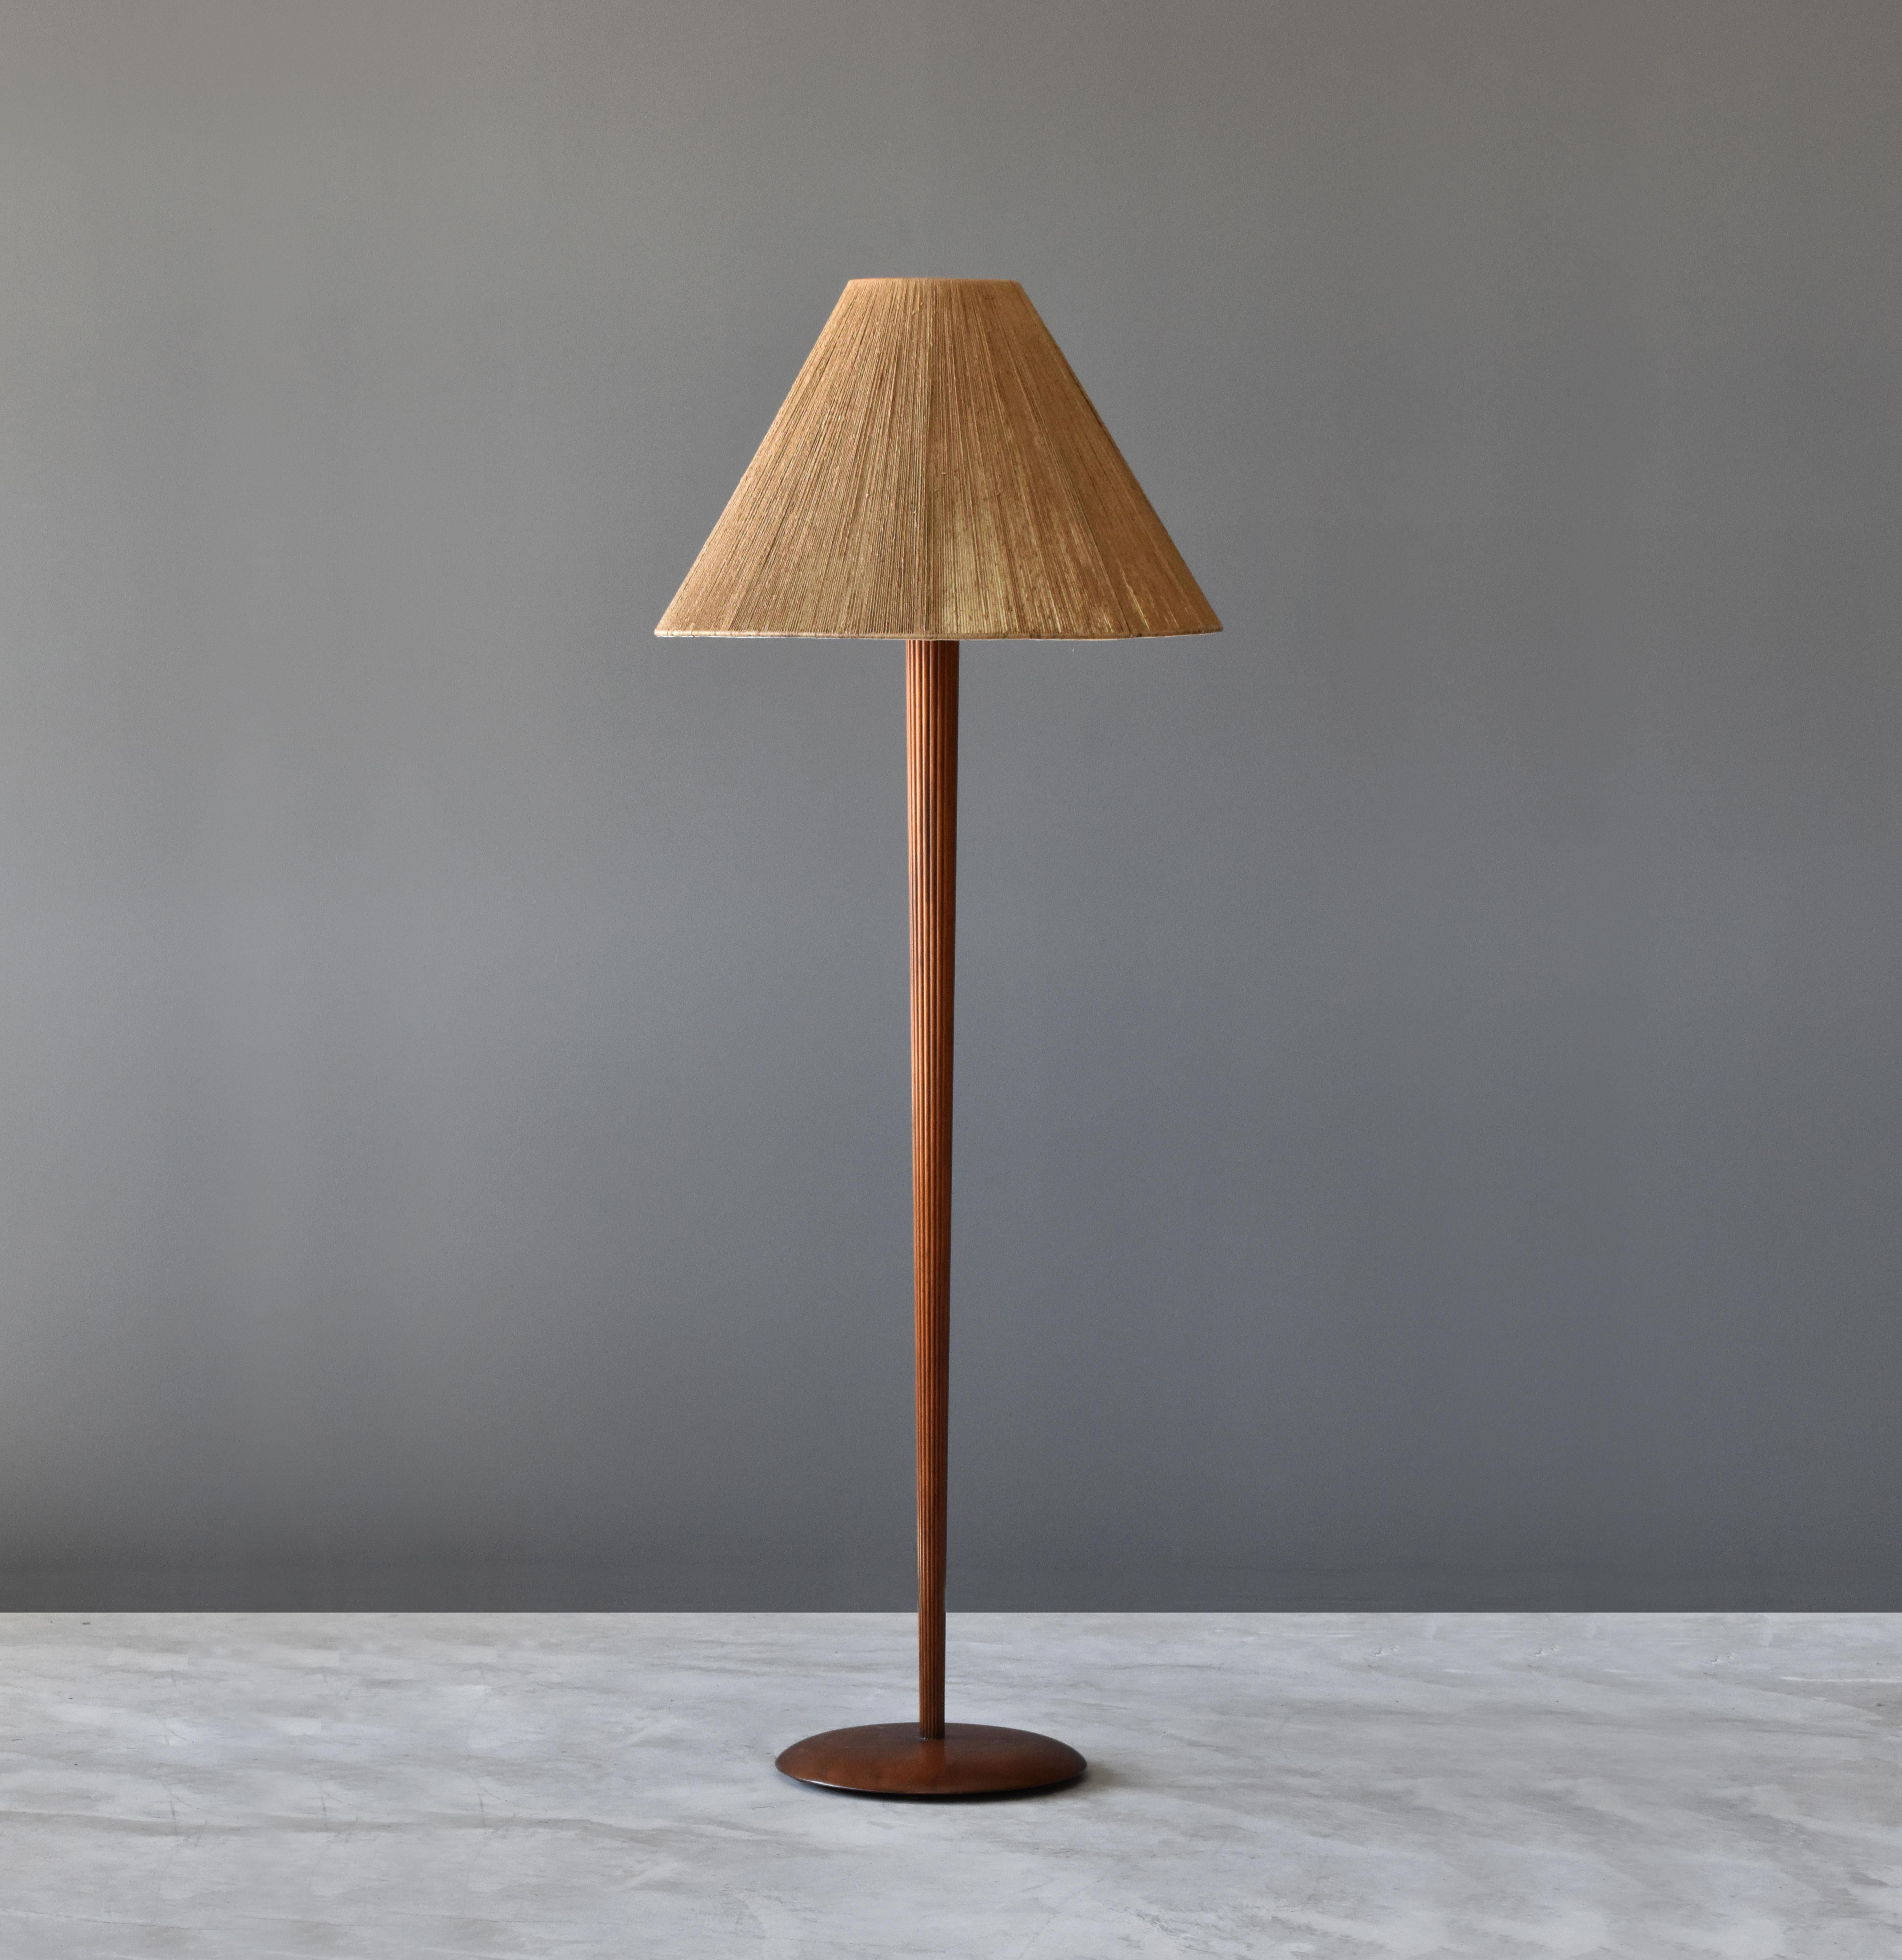 A rare or possibly unique floor lamp designed by Vladimir Kagan. Produced by Kagan-Dreyfus in New York circa 1960s. 

Rod and base is finely carved walnut. Bears its original oversized string shade. 

Other American designers of the era include